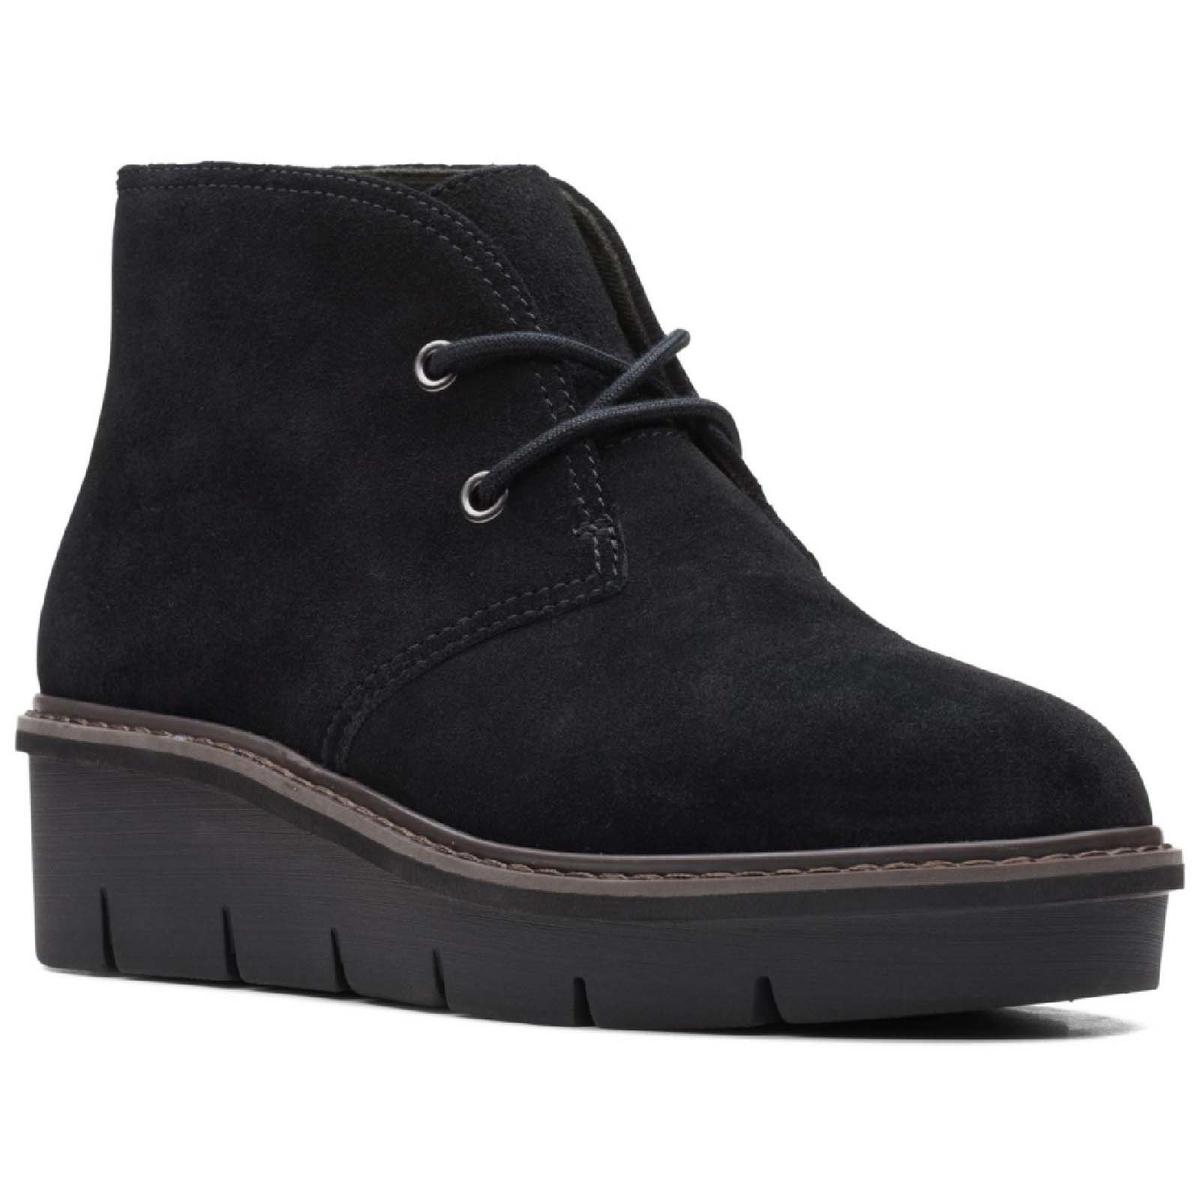 Clarks Women's Airabell Ankle Chukka Boot Black Suede 8.5 Medium for ...